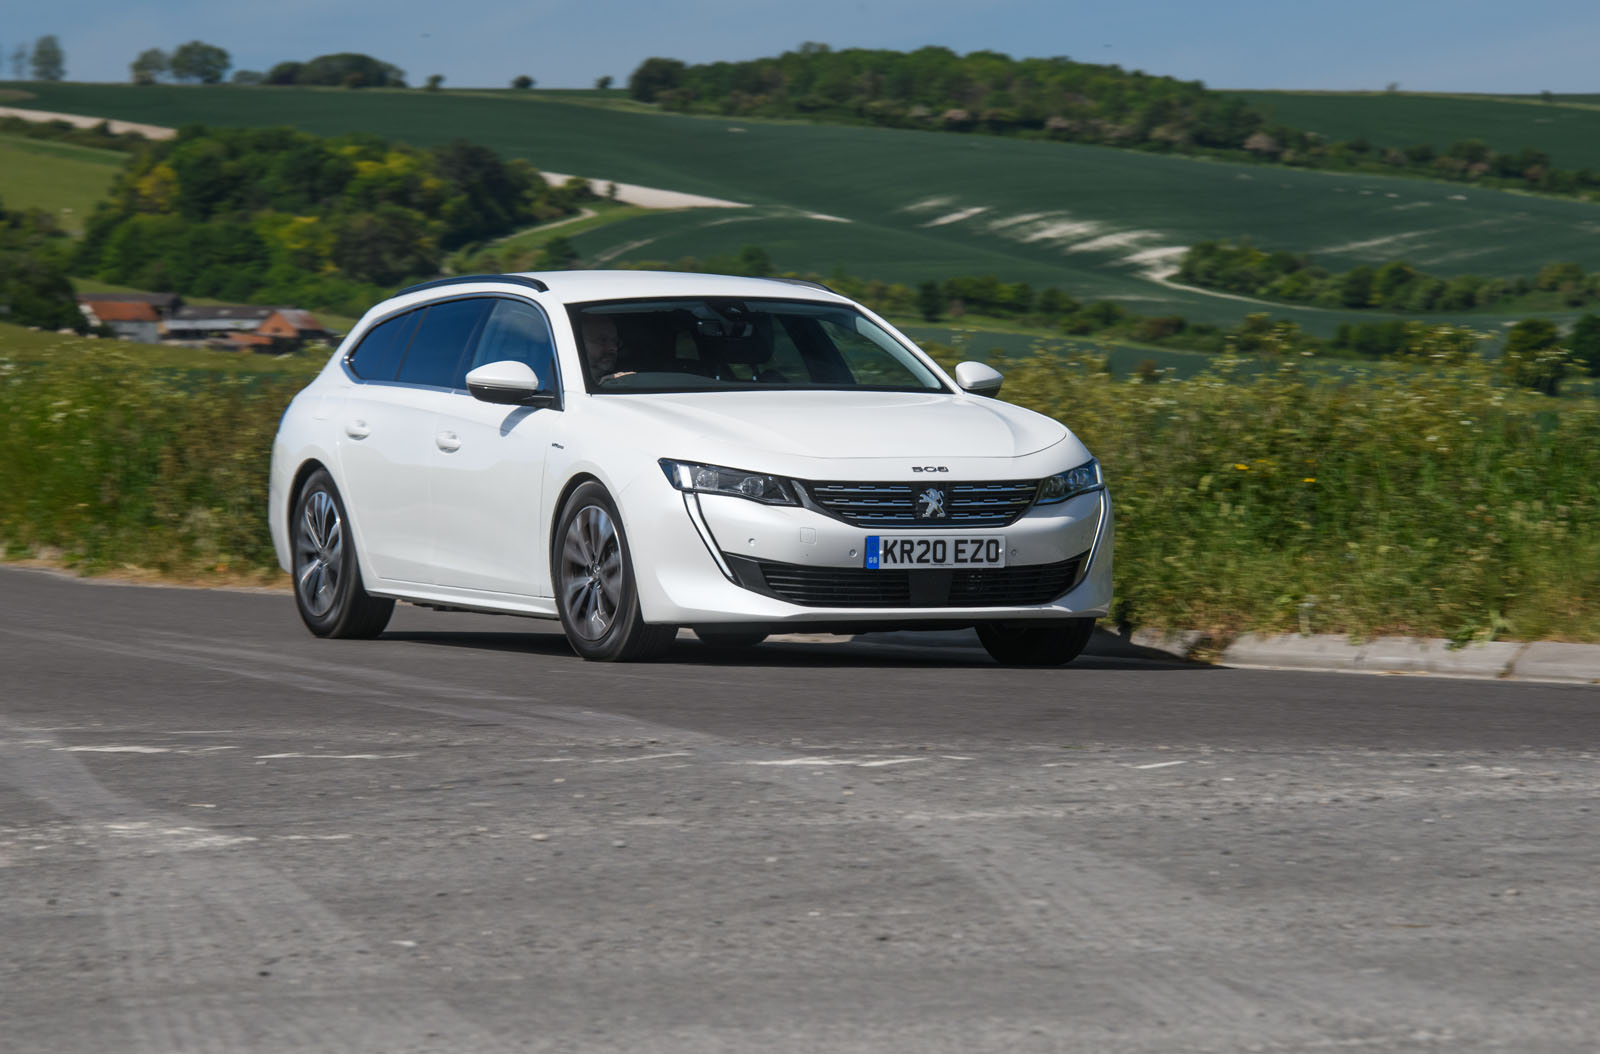 Peugeot 508 SW Hybrid 2020 road test review - on the road front